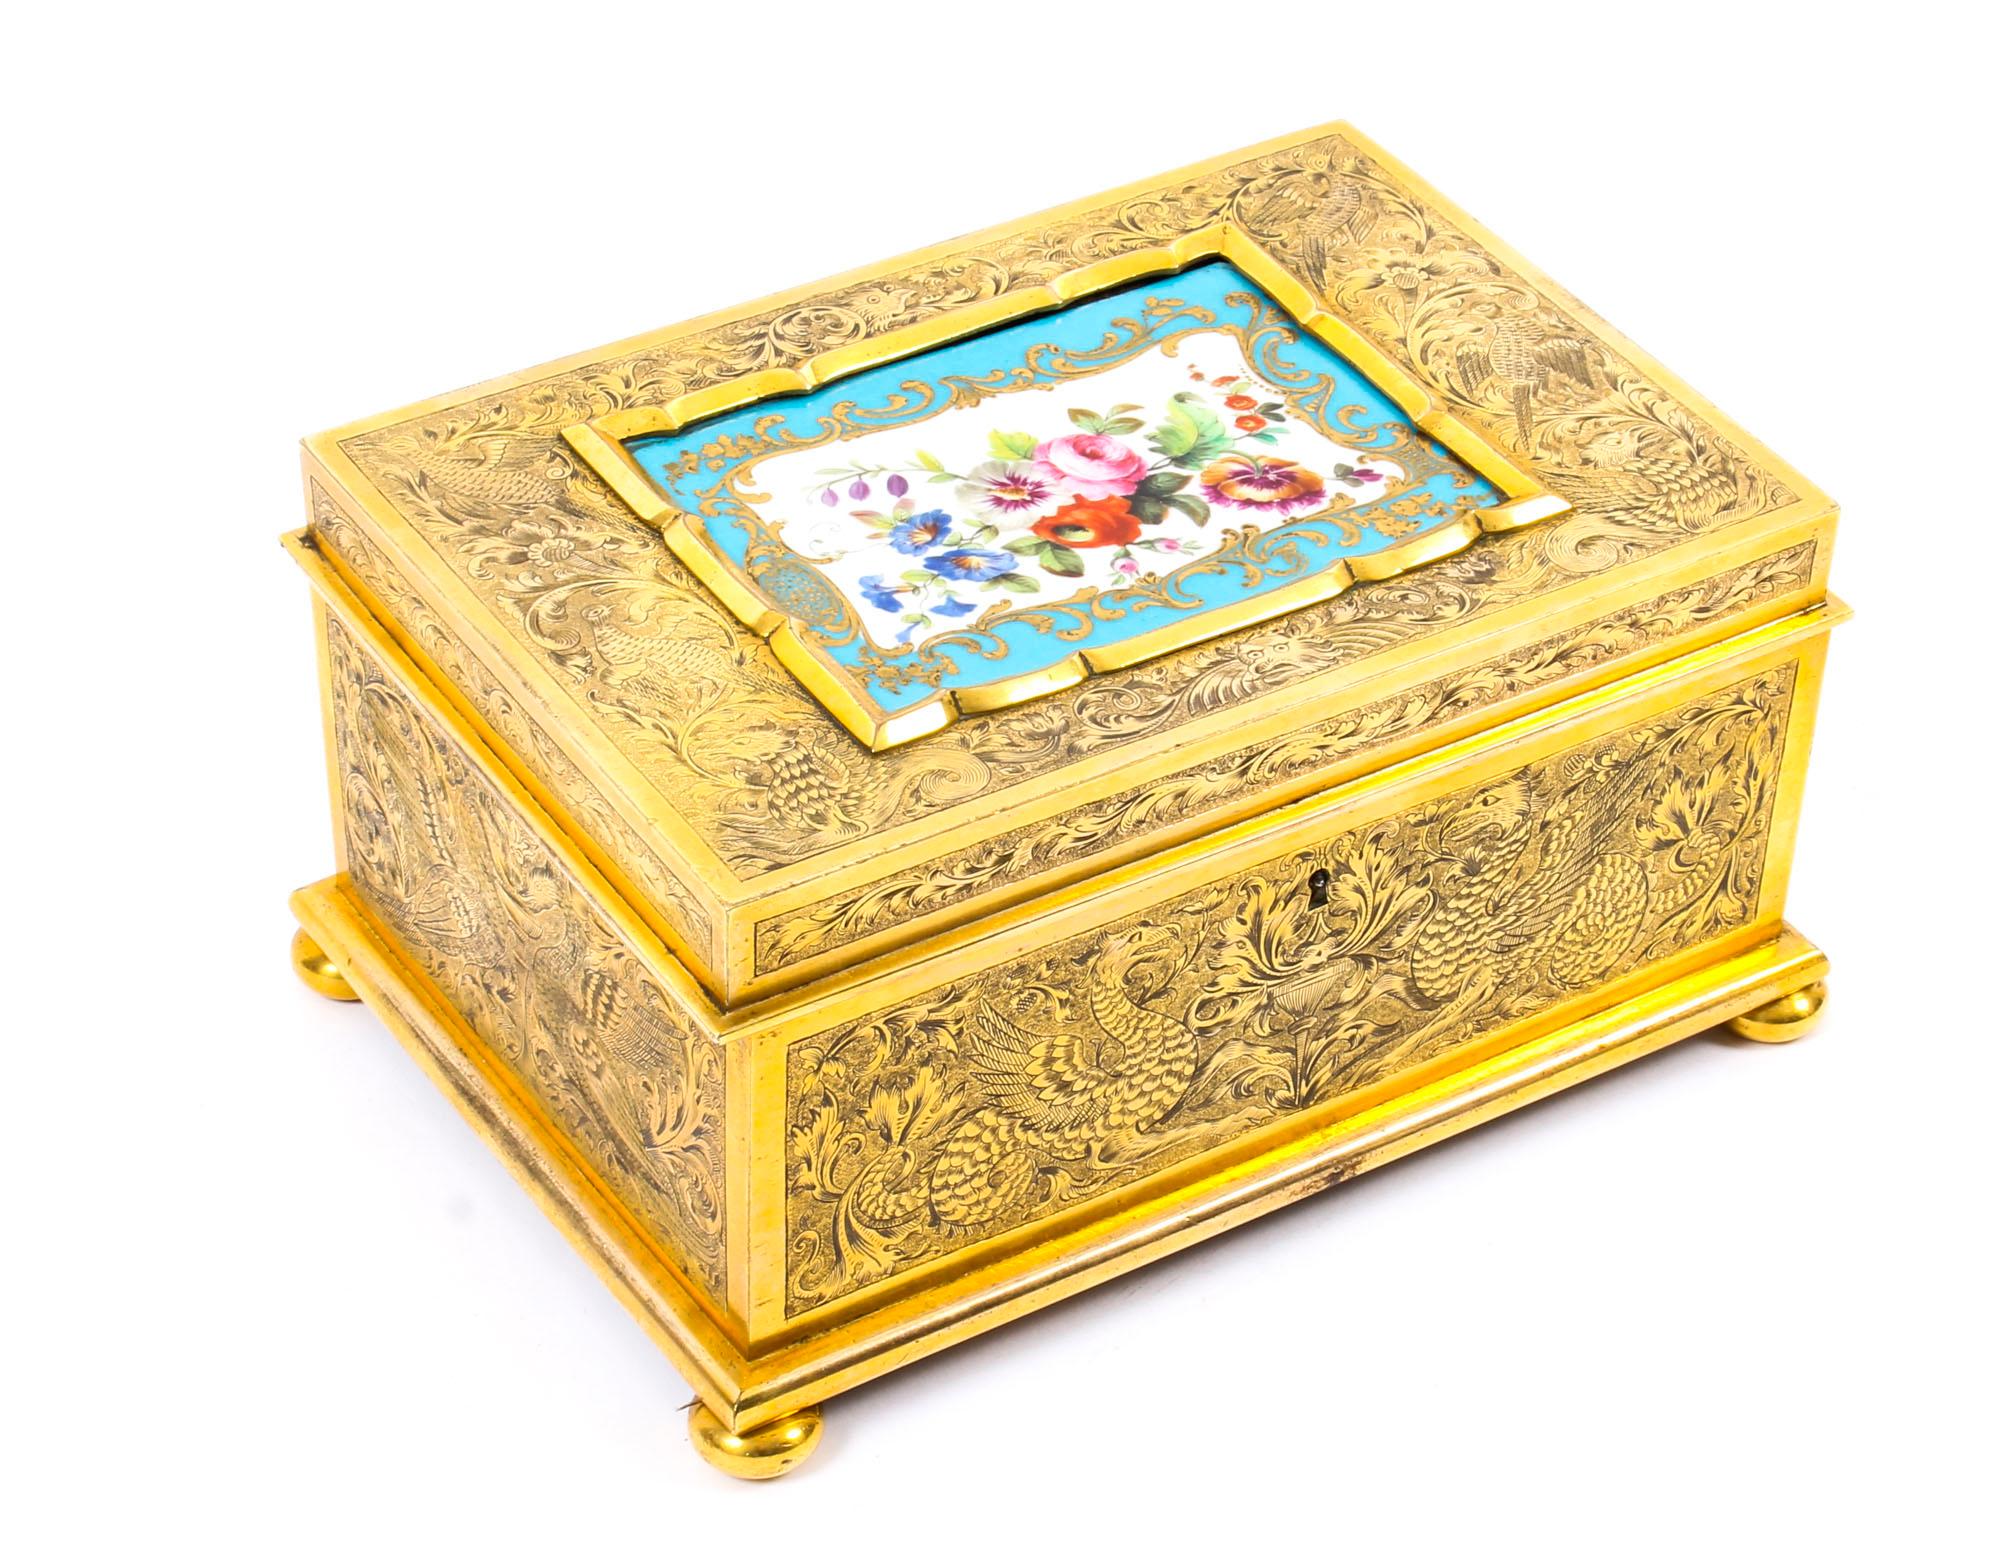 Ormolu Sevres Jewel Casket Exhibited at the Great Exhibition 1851, 19th Century 13